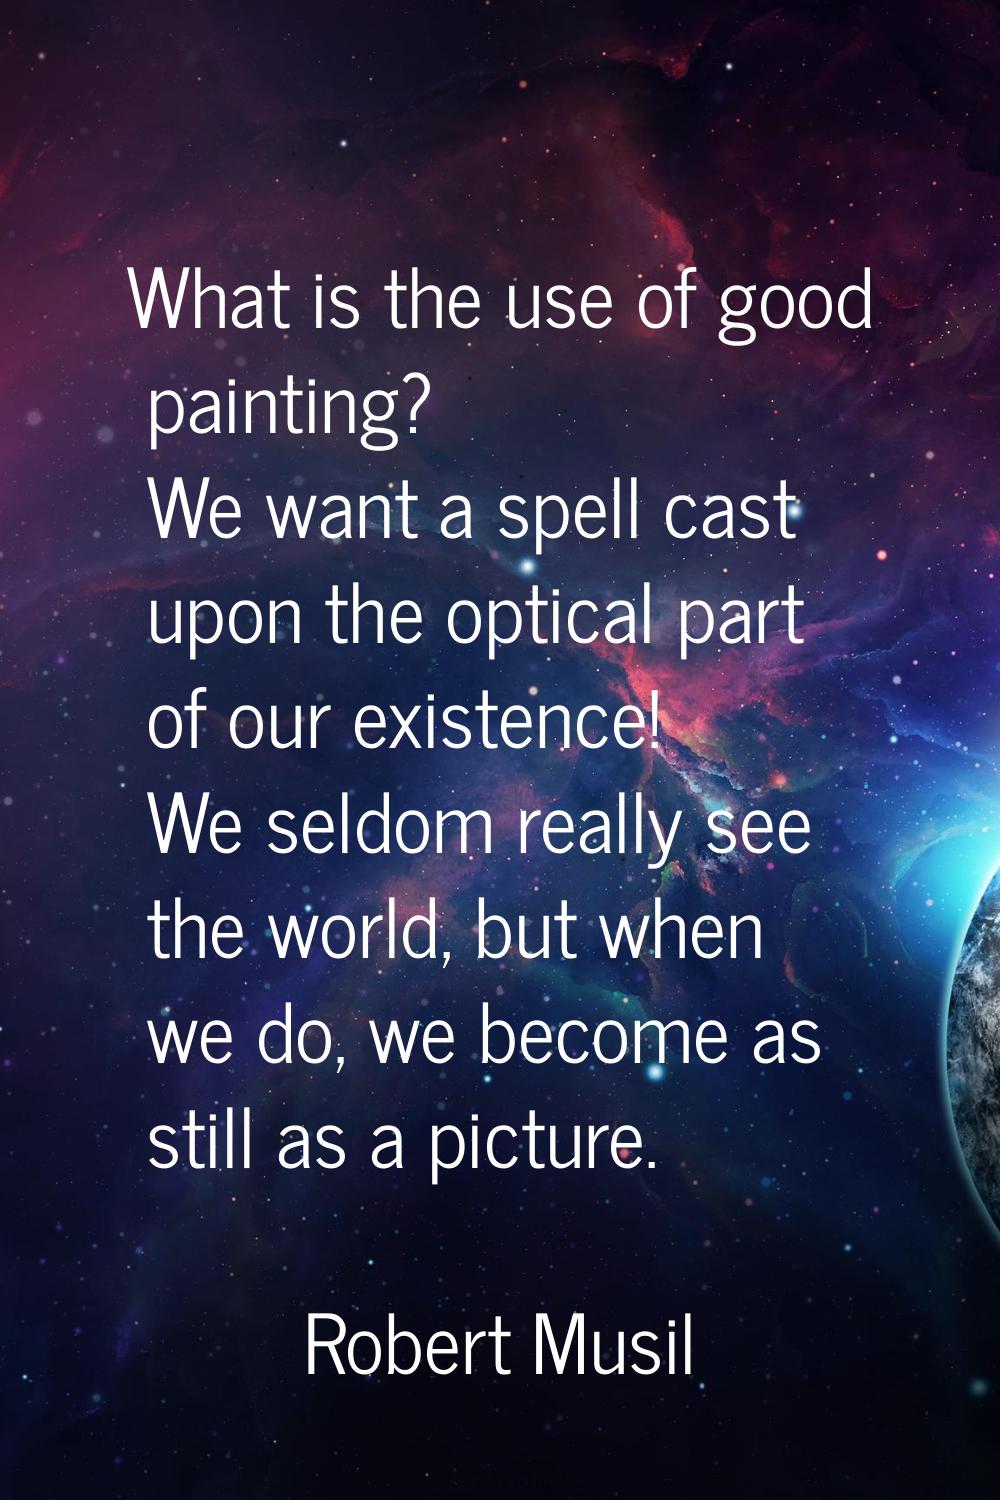 What is the use of good painting? We want a spell cast upon the optical part of our existence! We s